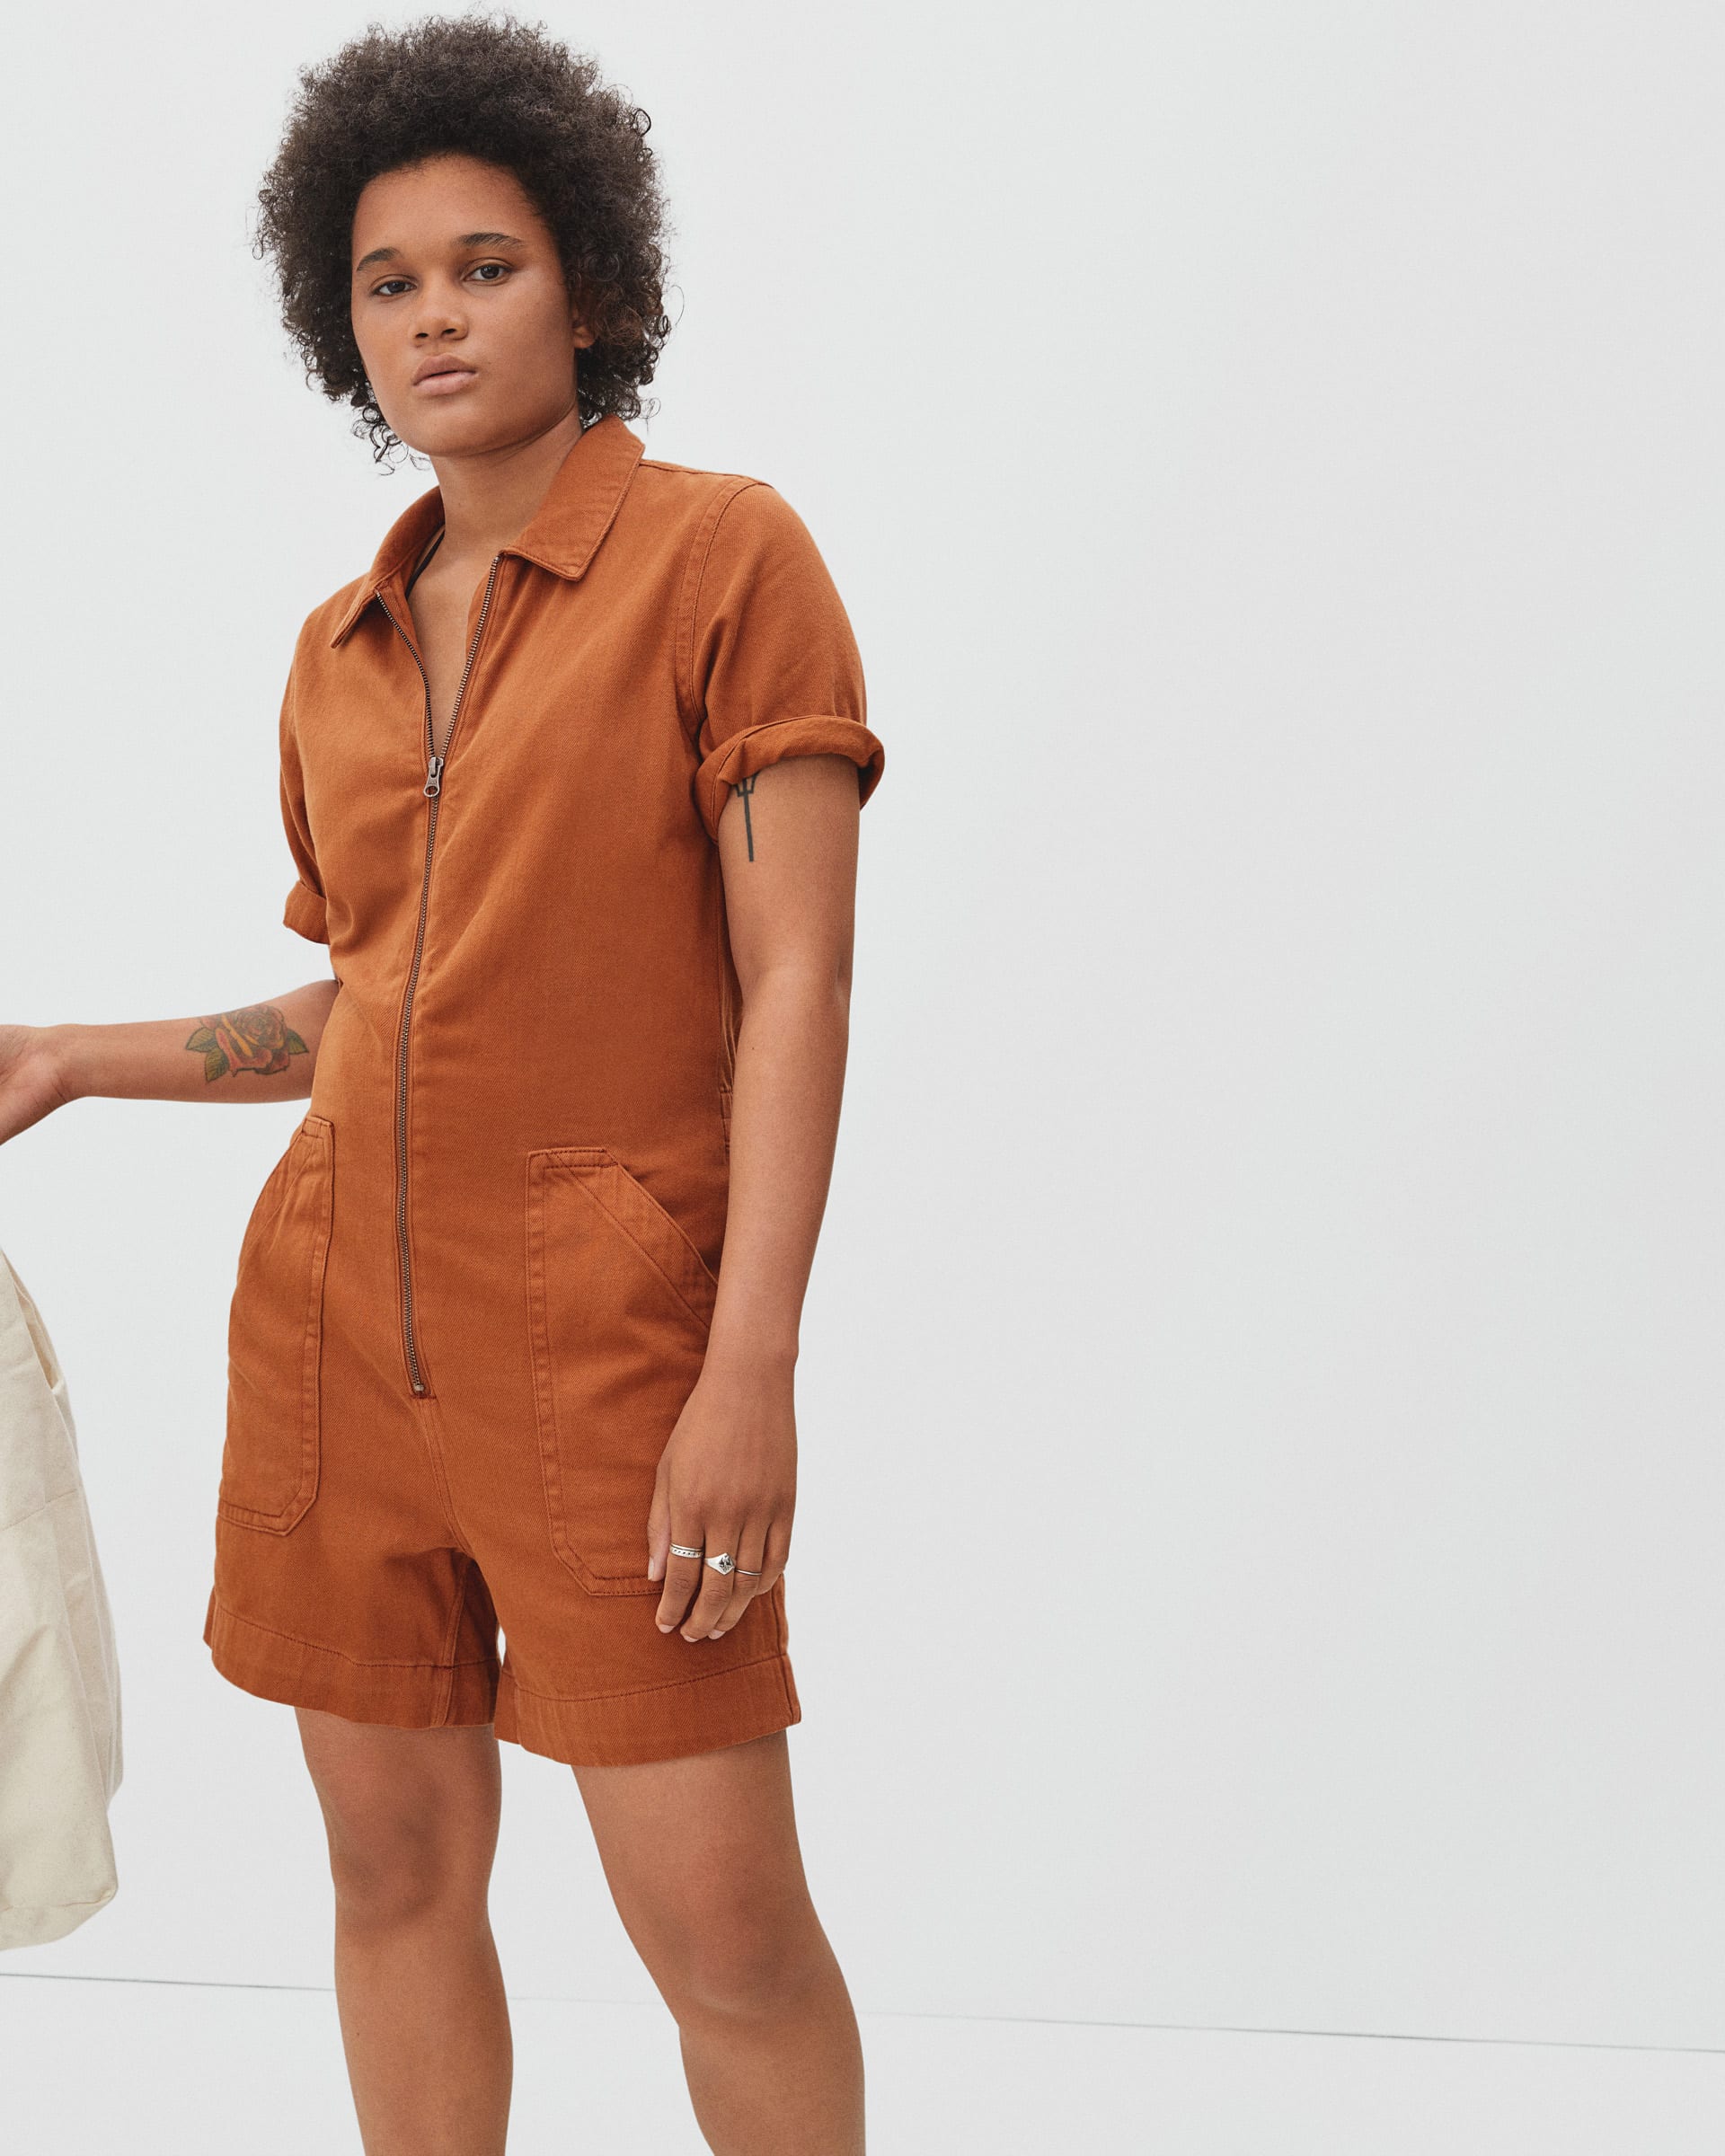 The Denim Short Coverall Canyon – Everlane